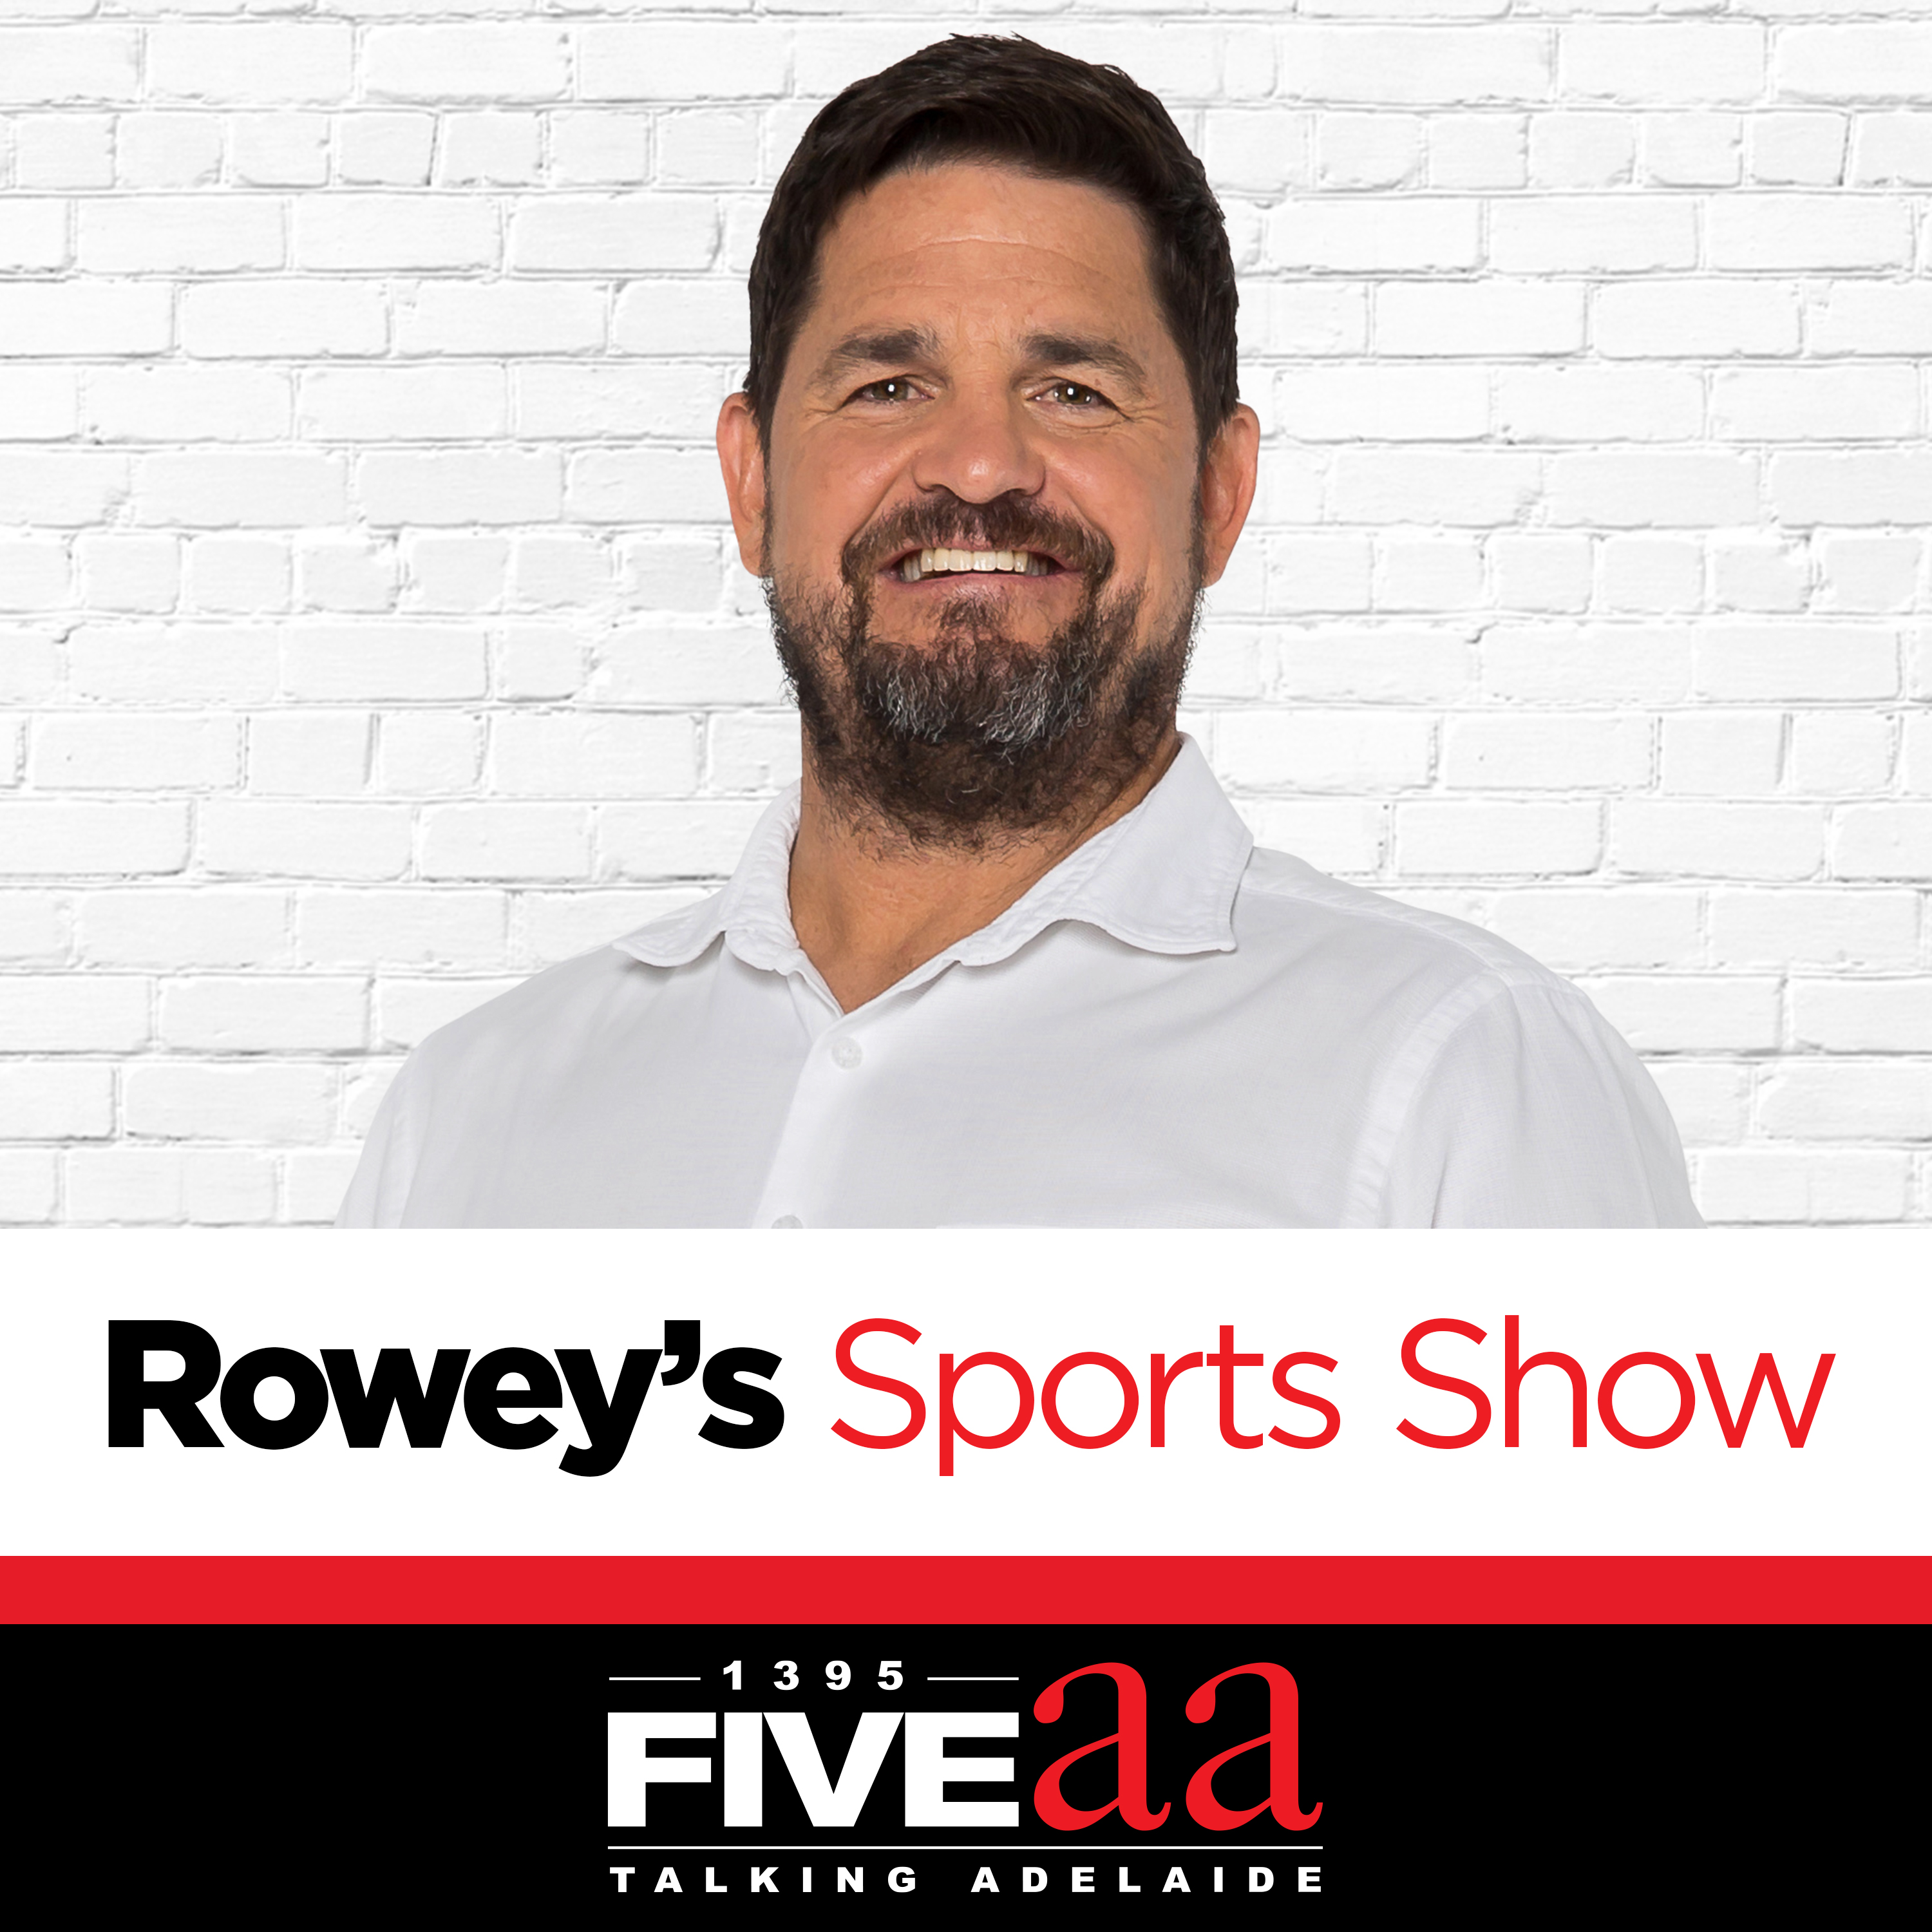 Rowey's Sports Show Podcast - 20 May 2021